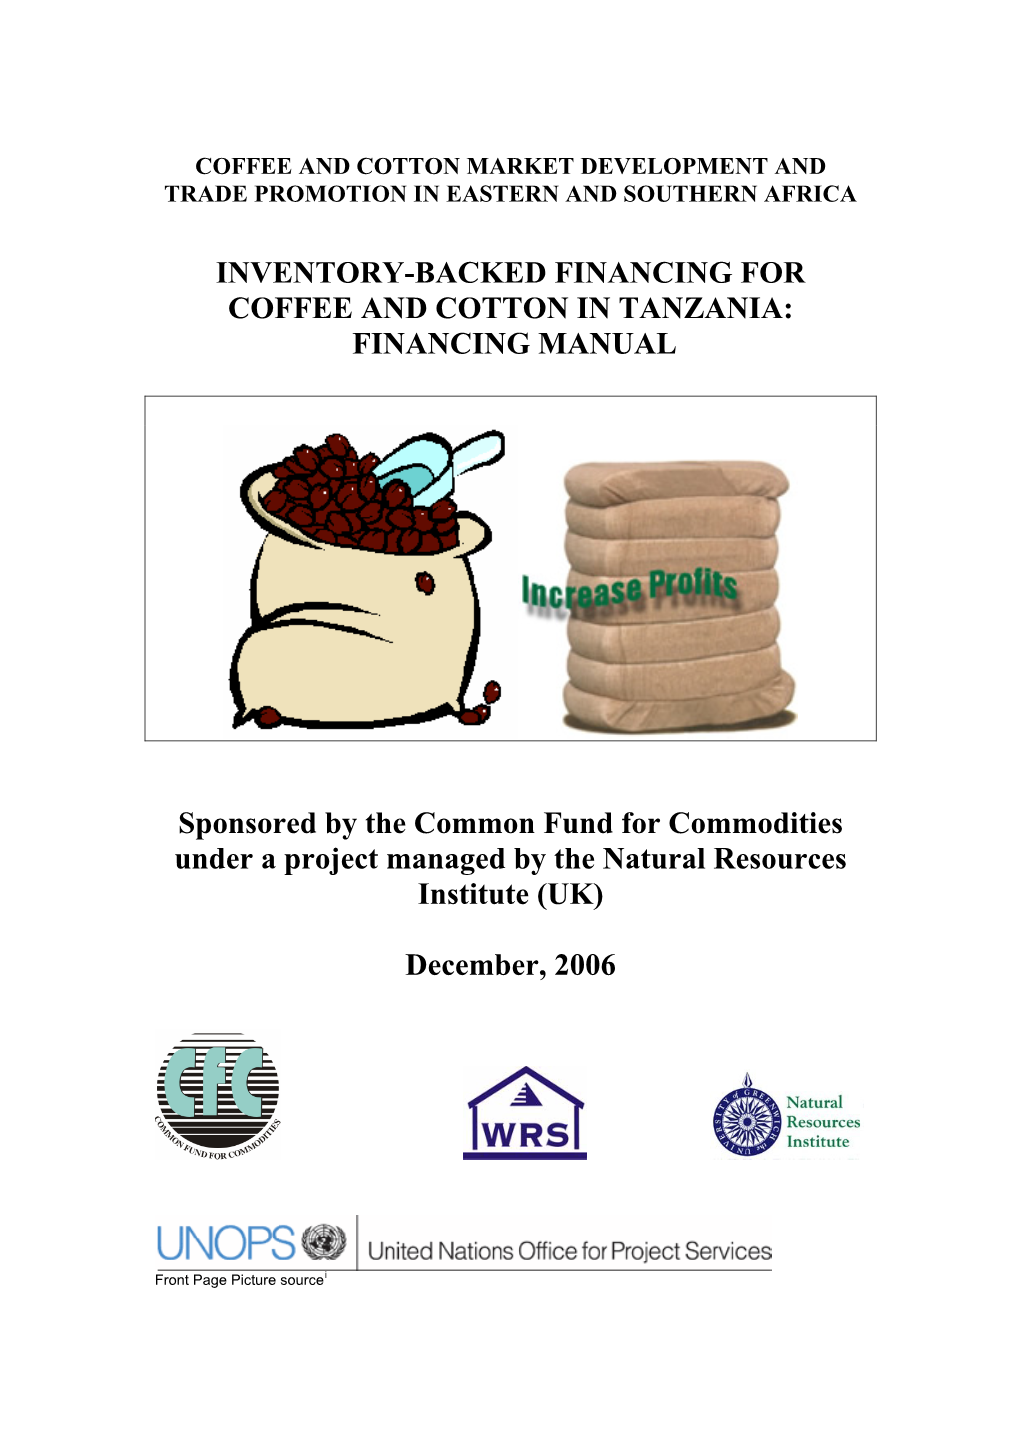 Inventory-Backed Financing for Coffee and Cotton in Tanzania: Financing Manual